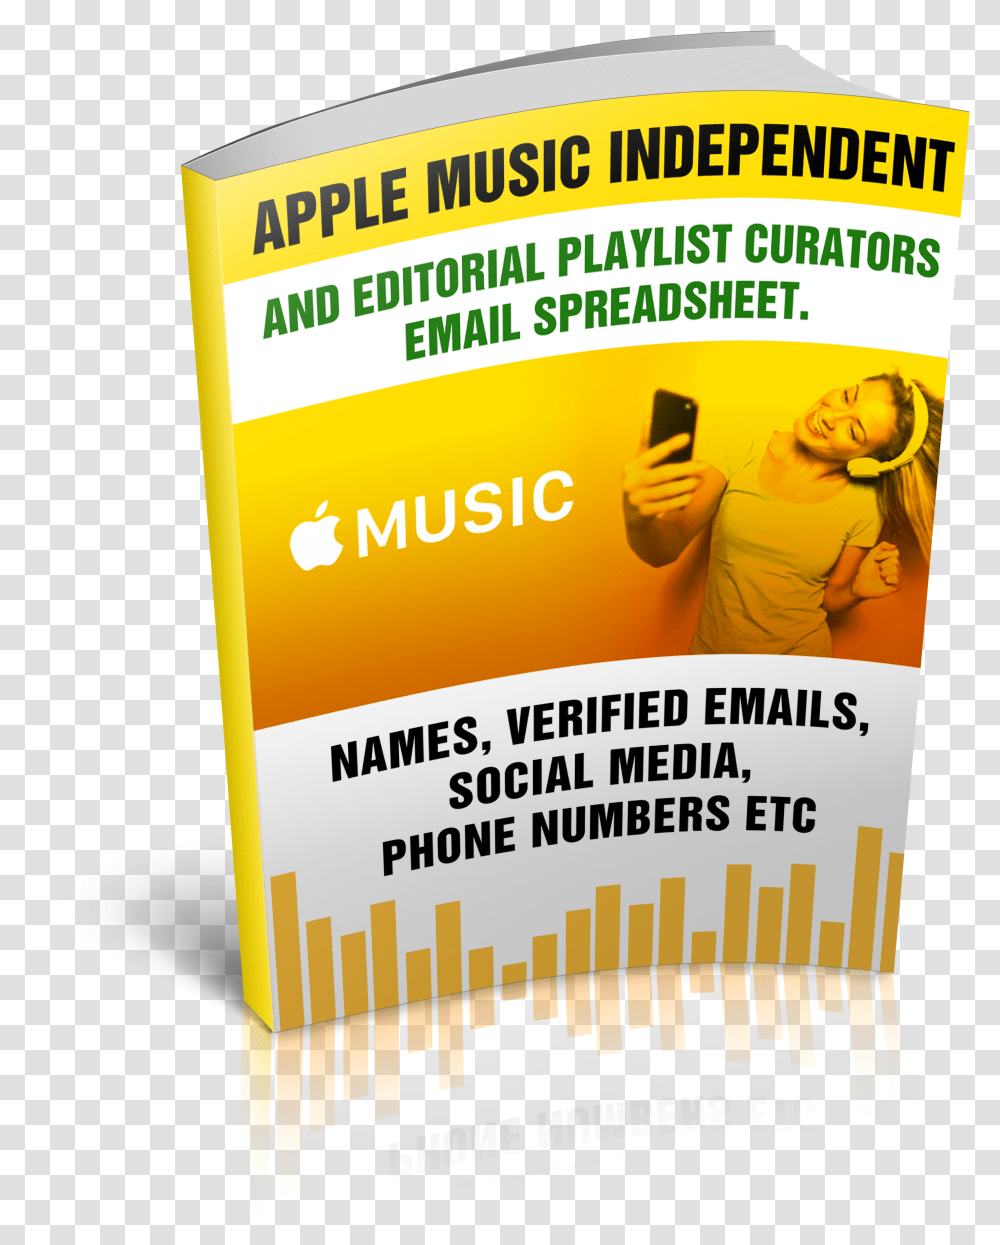 Apple Music Editorial And Independent Playlist Curators Flyer Transparent Png